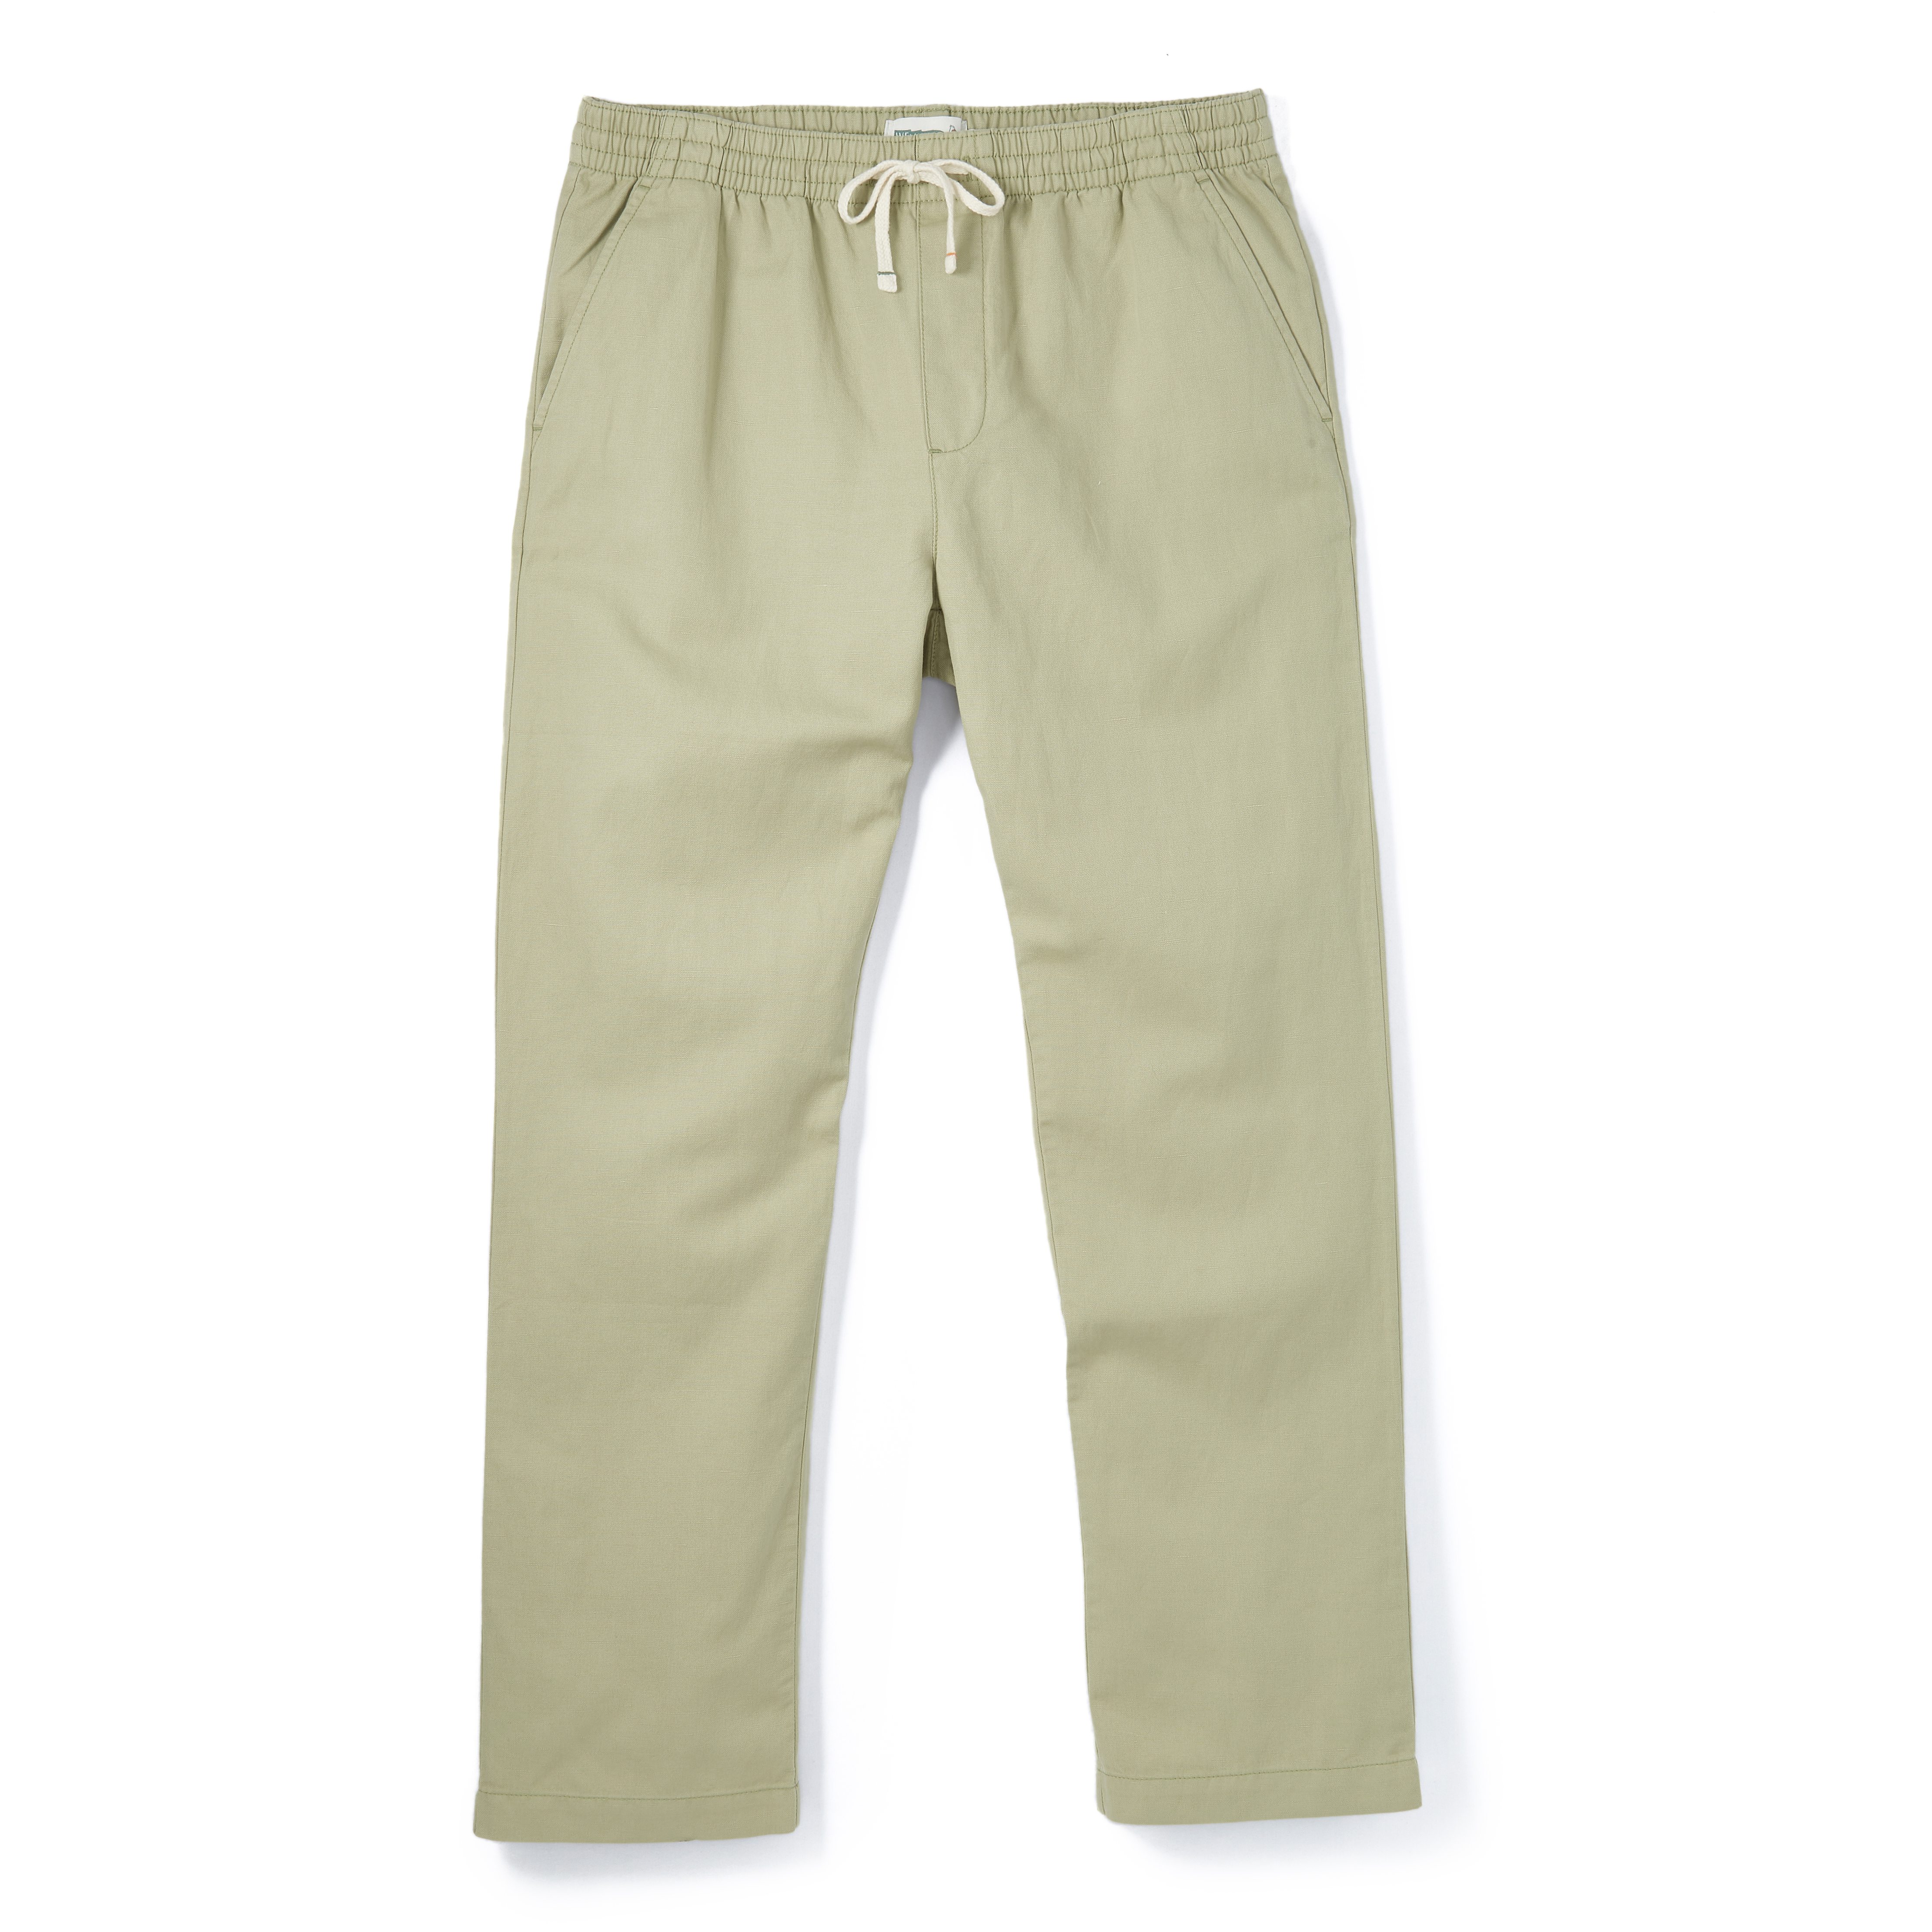 Cotton Linen Easy Pant - Straight